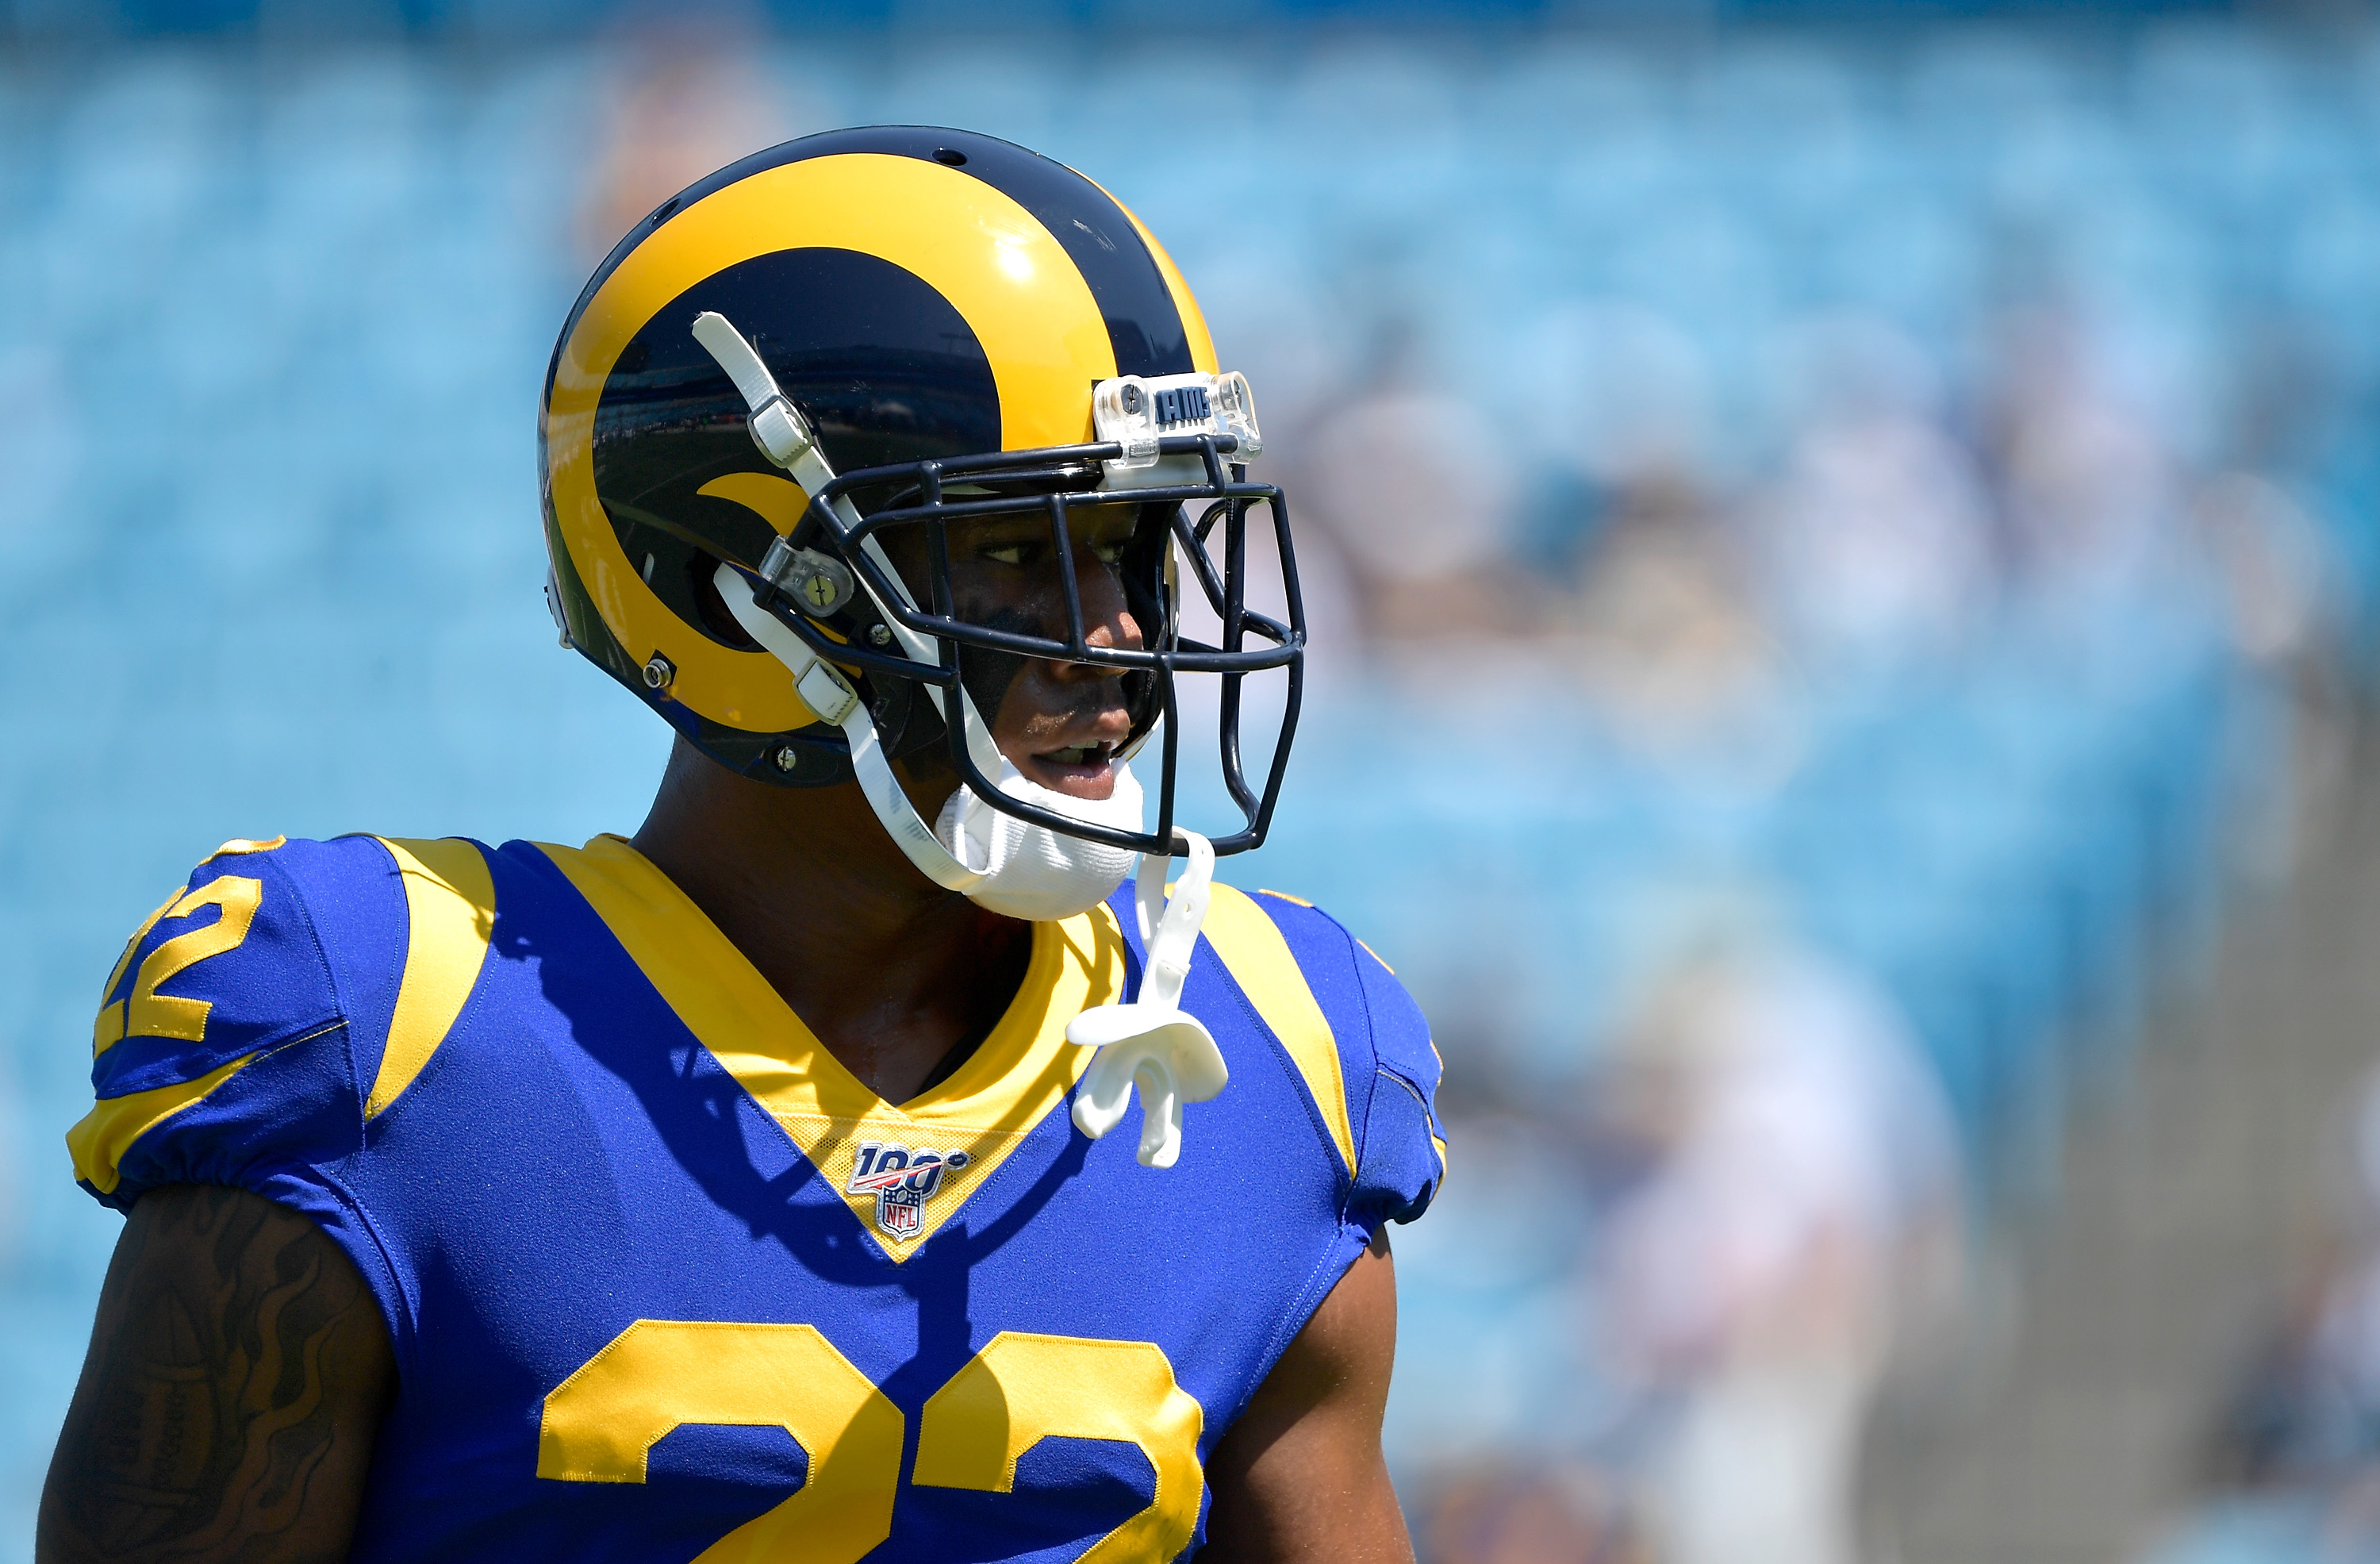 CHARLOTTE, NORTH CAROLINA - SEPTEMBER 08: Marcus Peters #22 of the Los Angeles Rams looks on during their game against the Carolina Panthers at Bank of America Stadium on September 08, 2019 in Charlotte, North Carolina. The Rams won 30-23. 